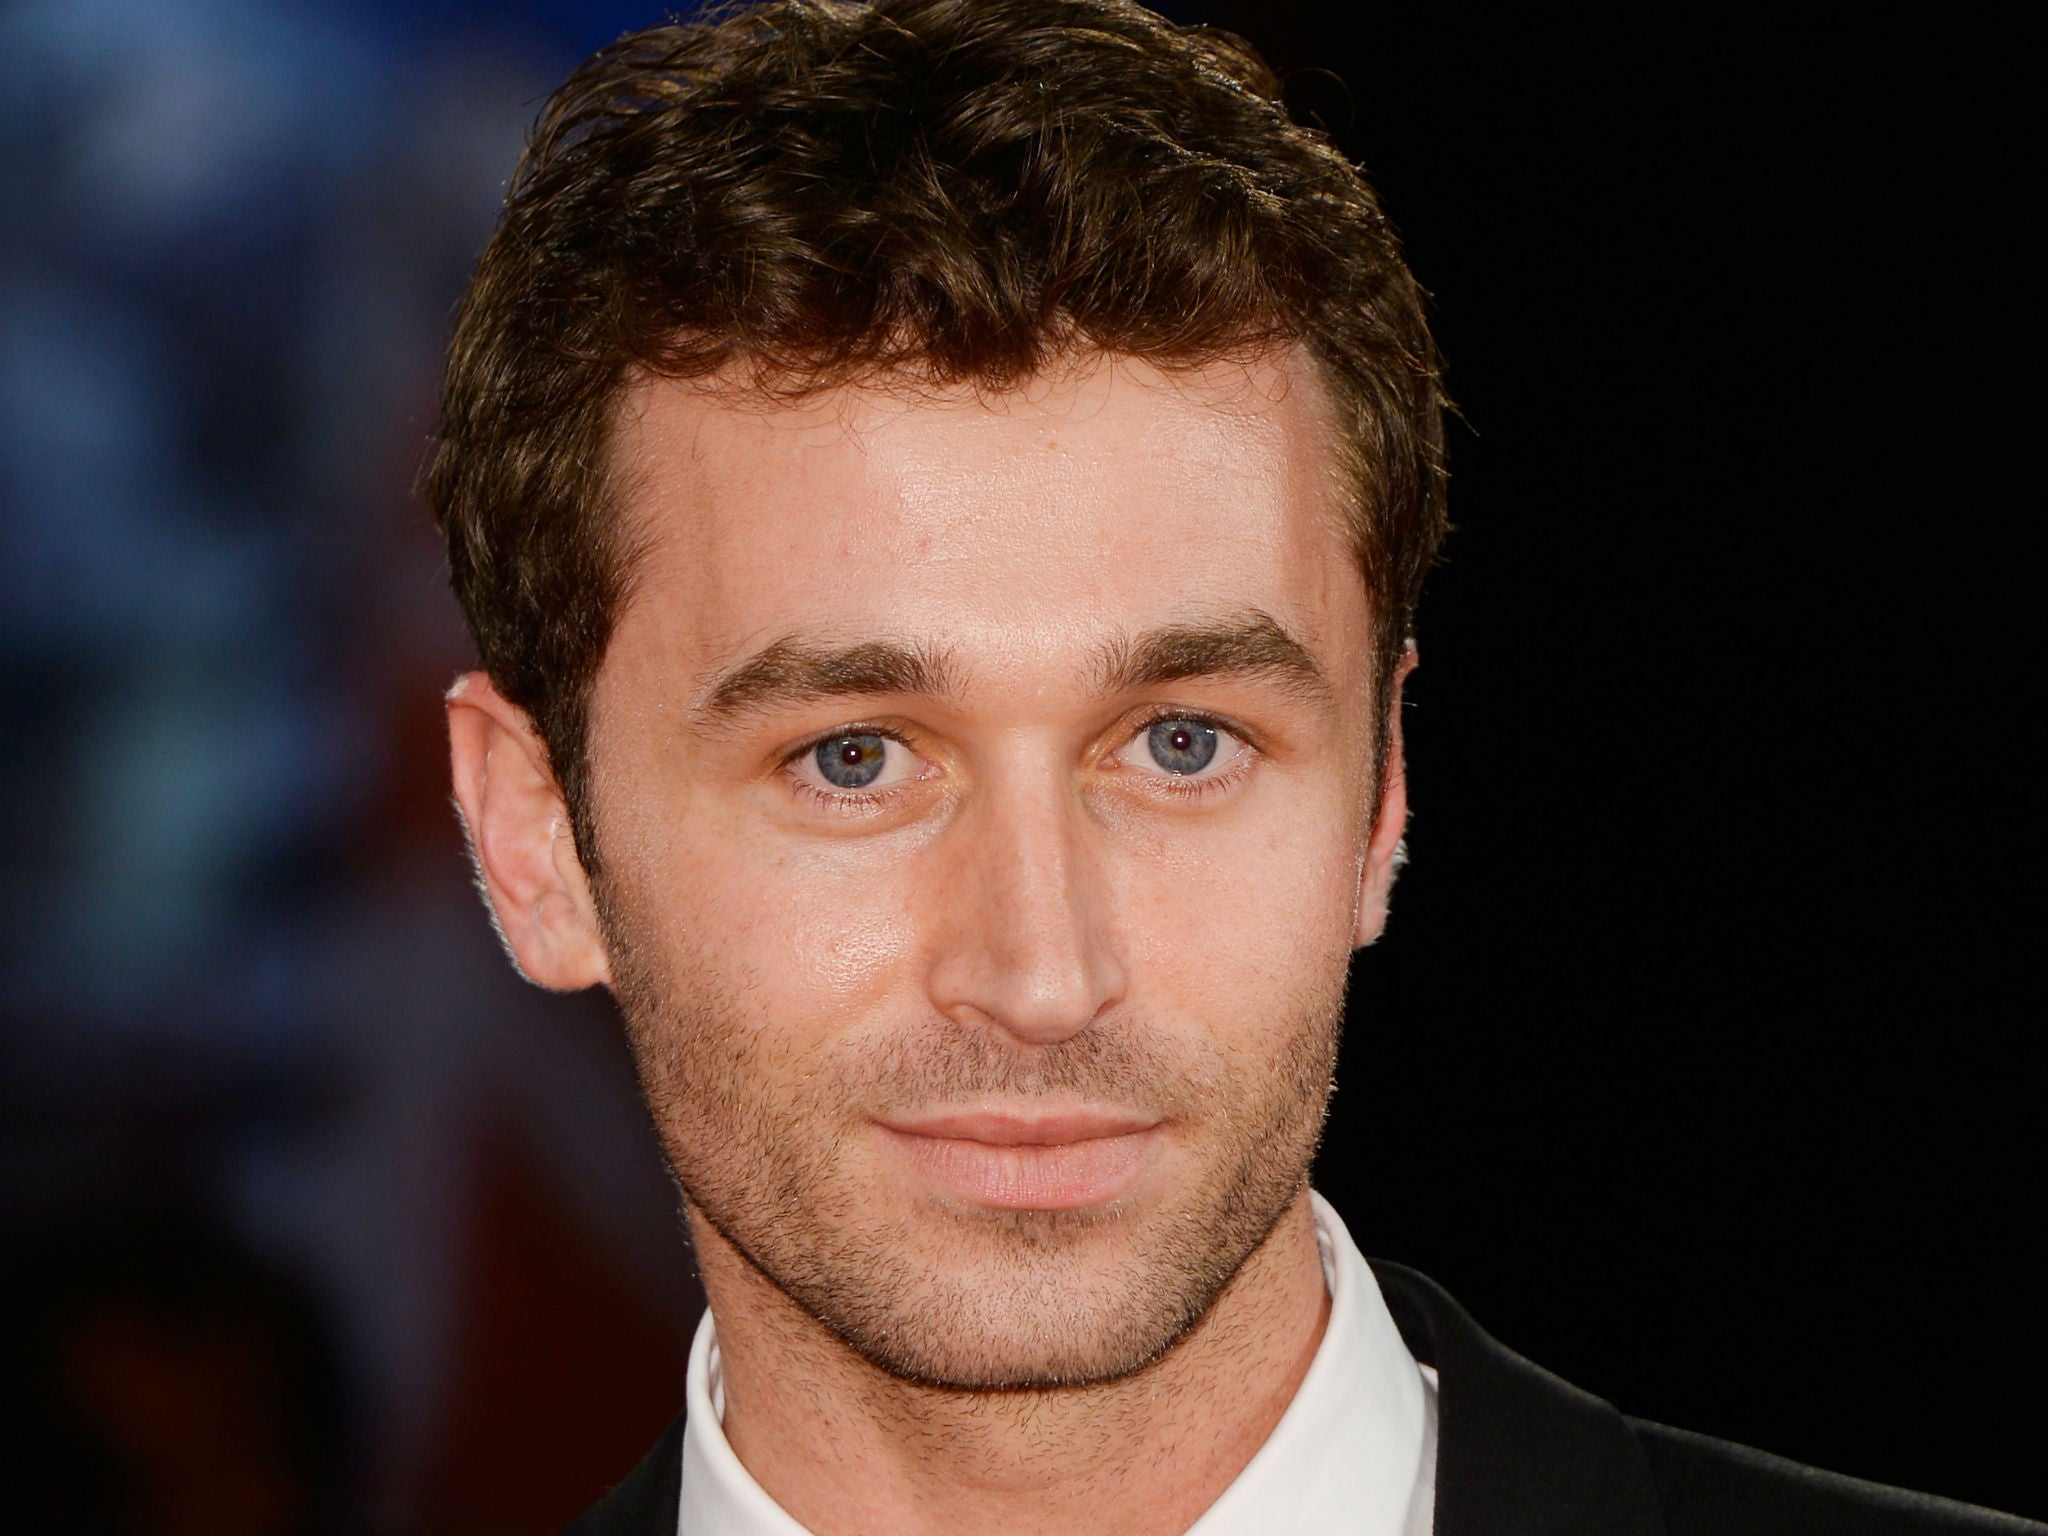 James Deen - James Deen: Porn actor 'baffled' by rape claims and issues ...